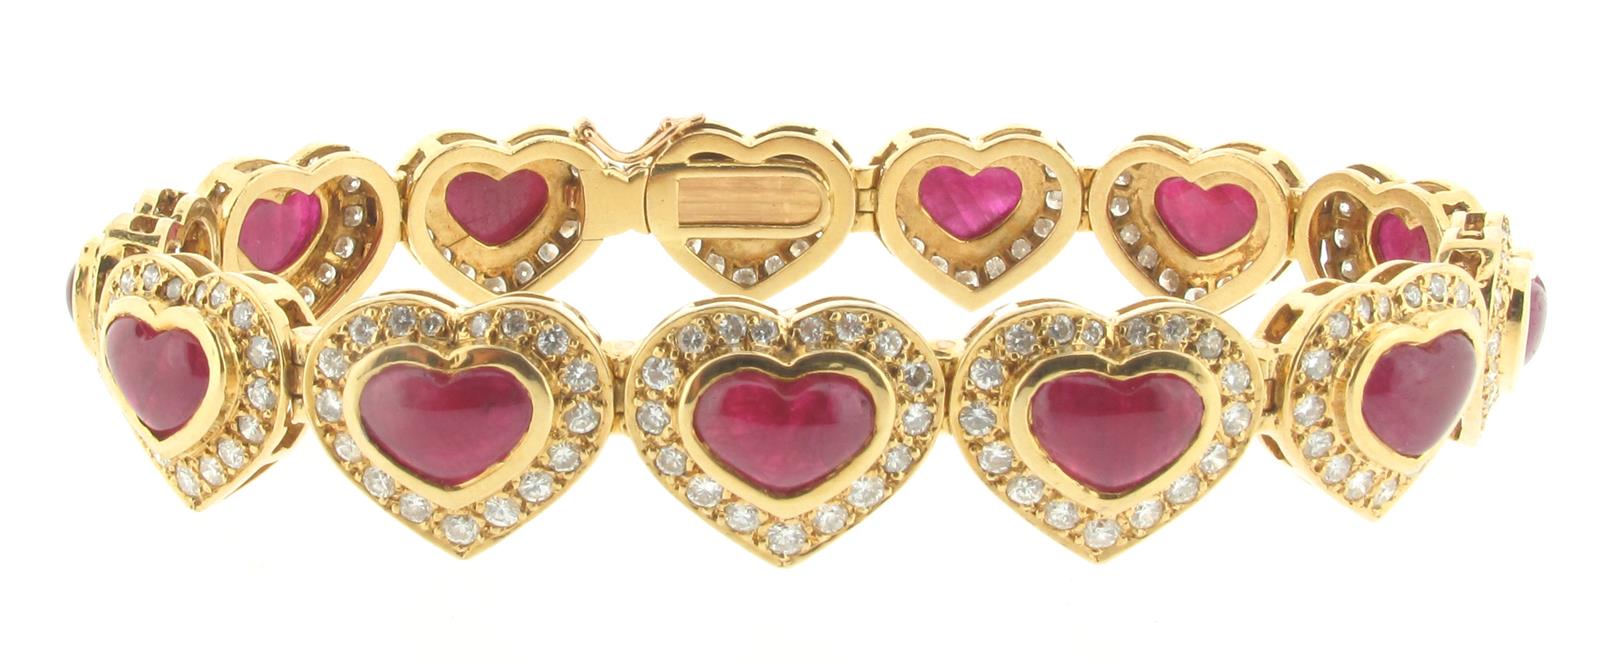 A ruby and diamond bracelet, designed as thirteen hearts, each set with a cabochon ruby within a